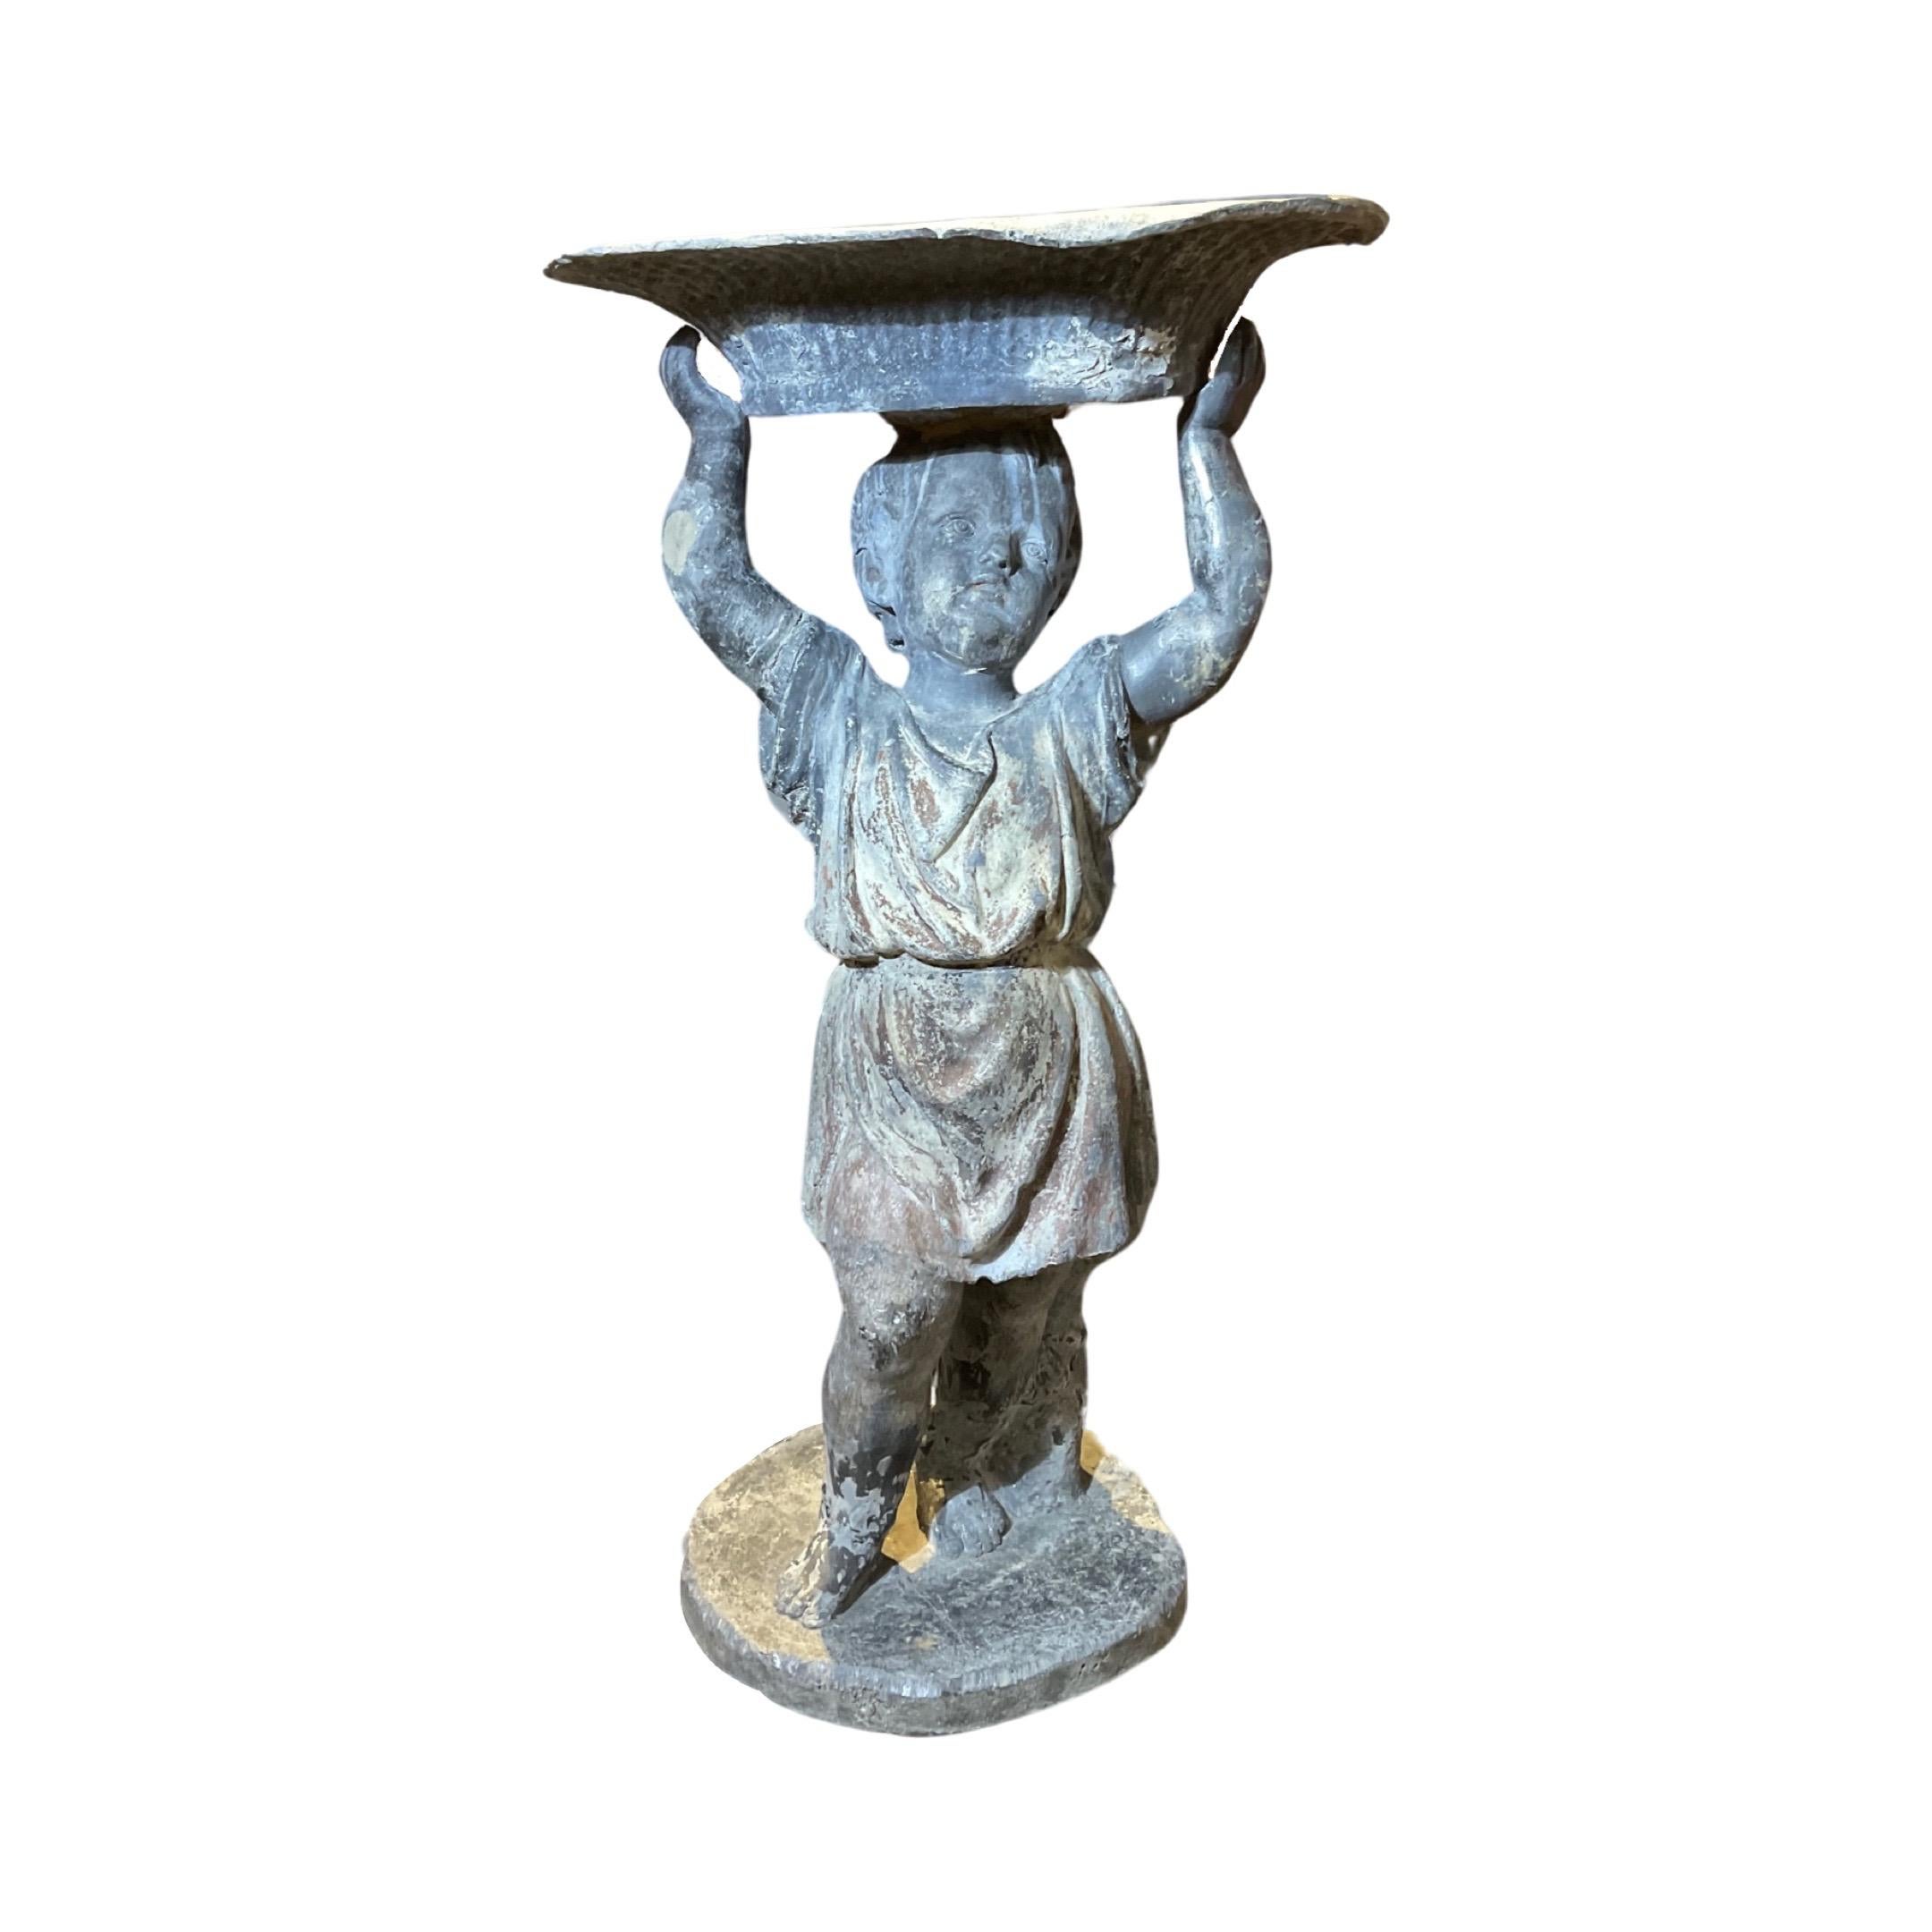 This French pewter cherub birdbath from the early 17th century is the perfect way to attract and encourage wildlife to your outdoor space. Made of luxurious pewter, the cherub birdbath is a timeless design perfect for any garden.